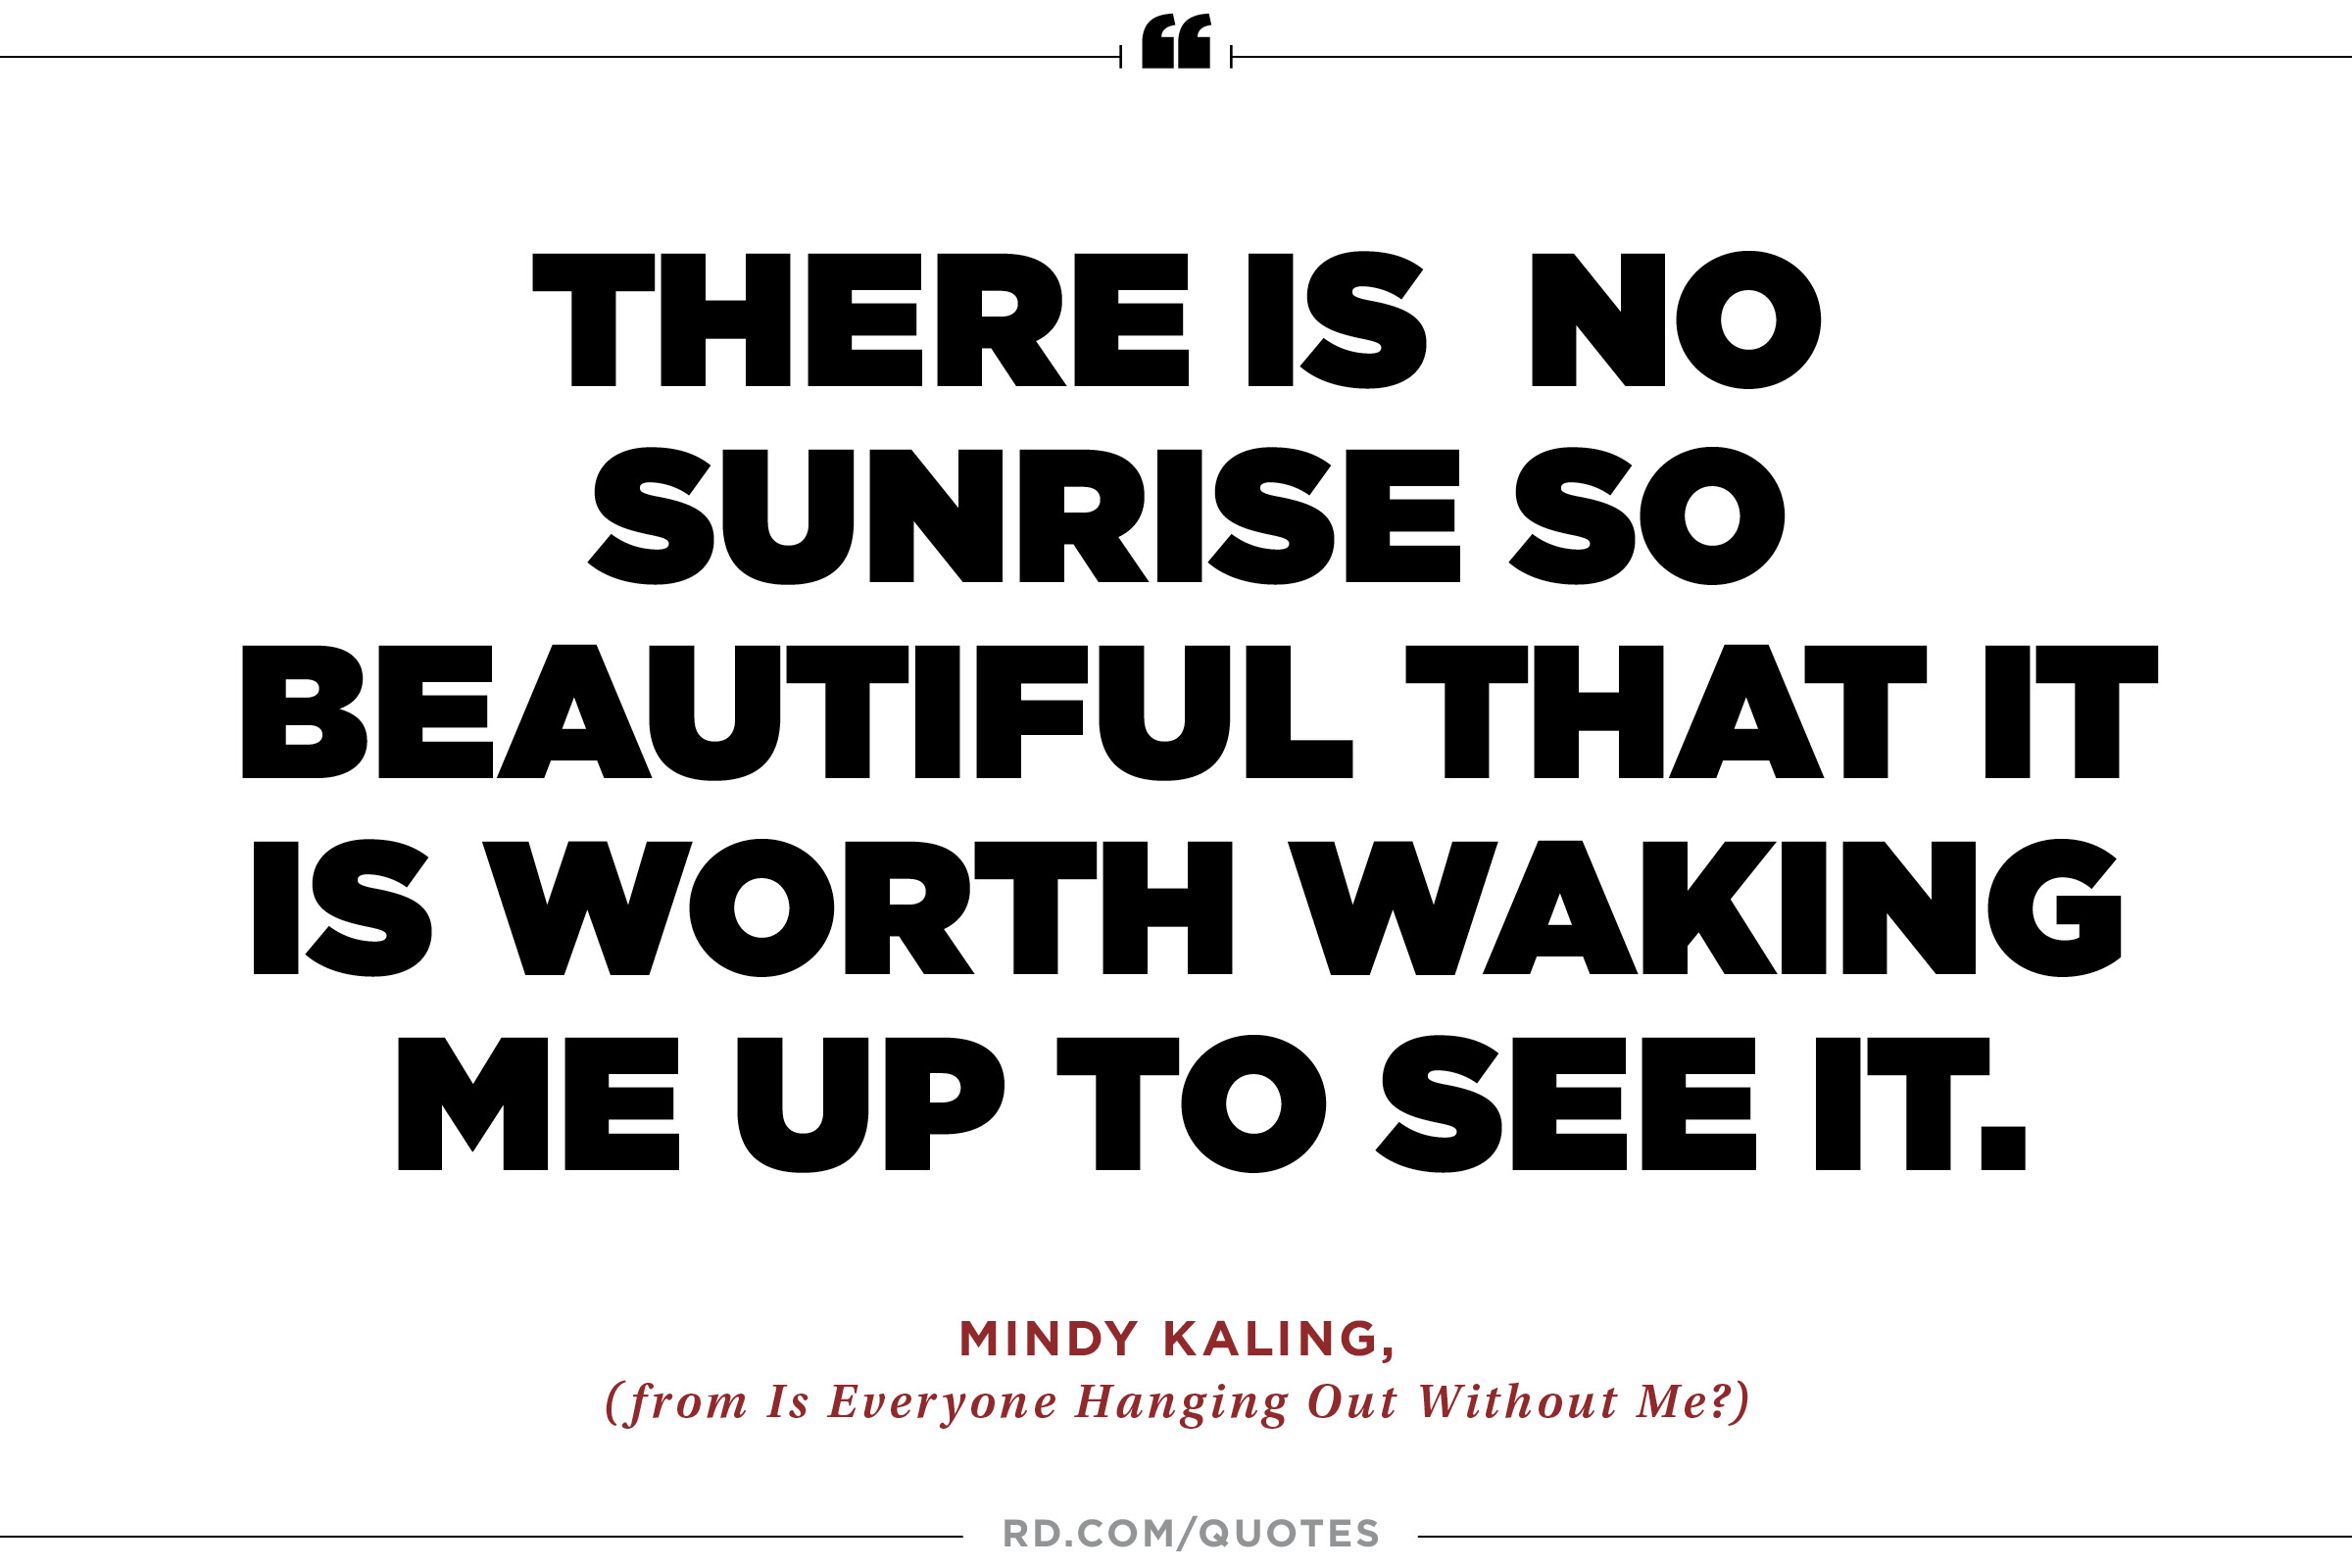 There is no sunrise so beautiful that it is worth waking me up to see it. Mindy Kaling